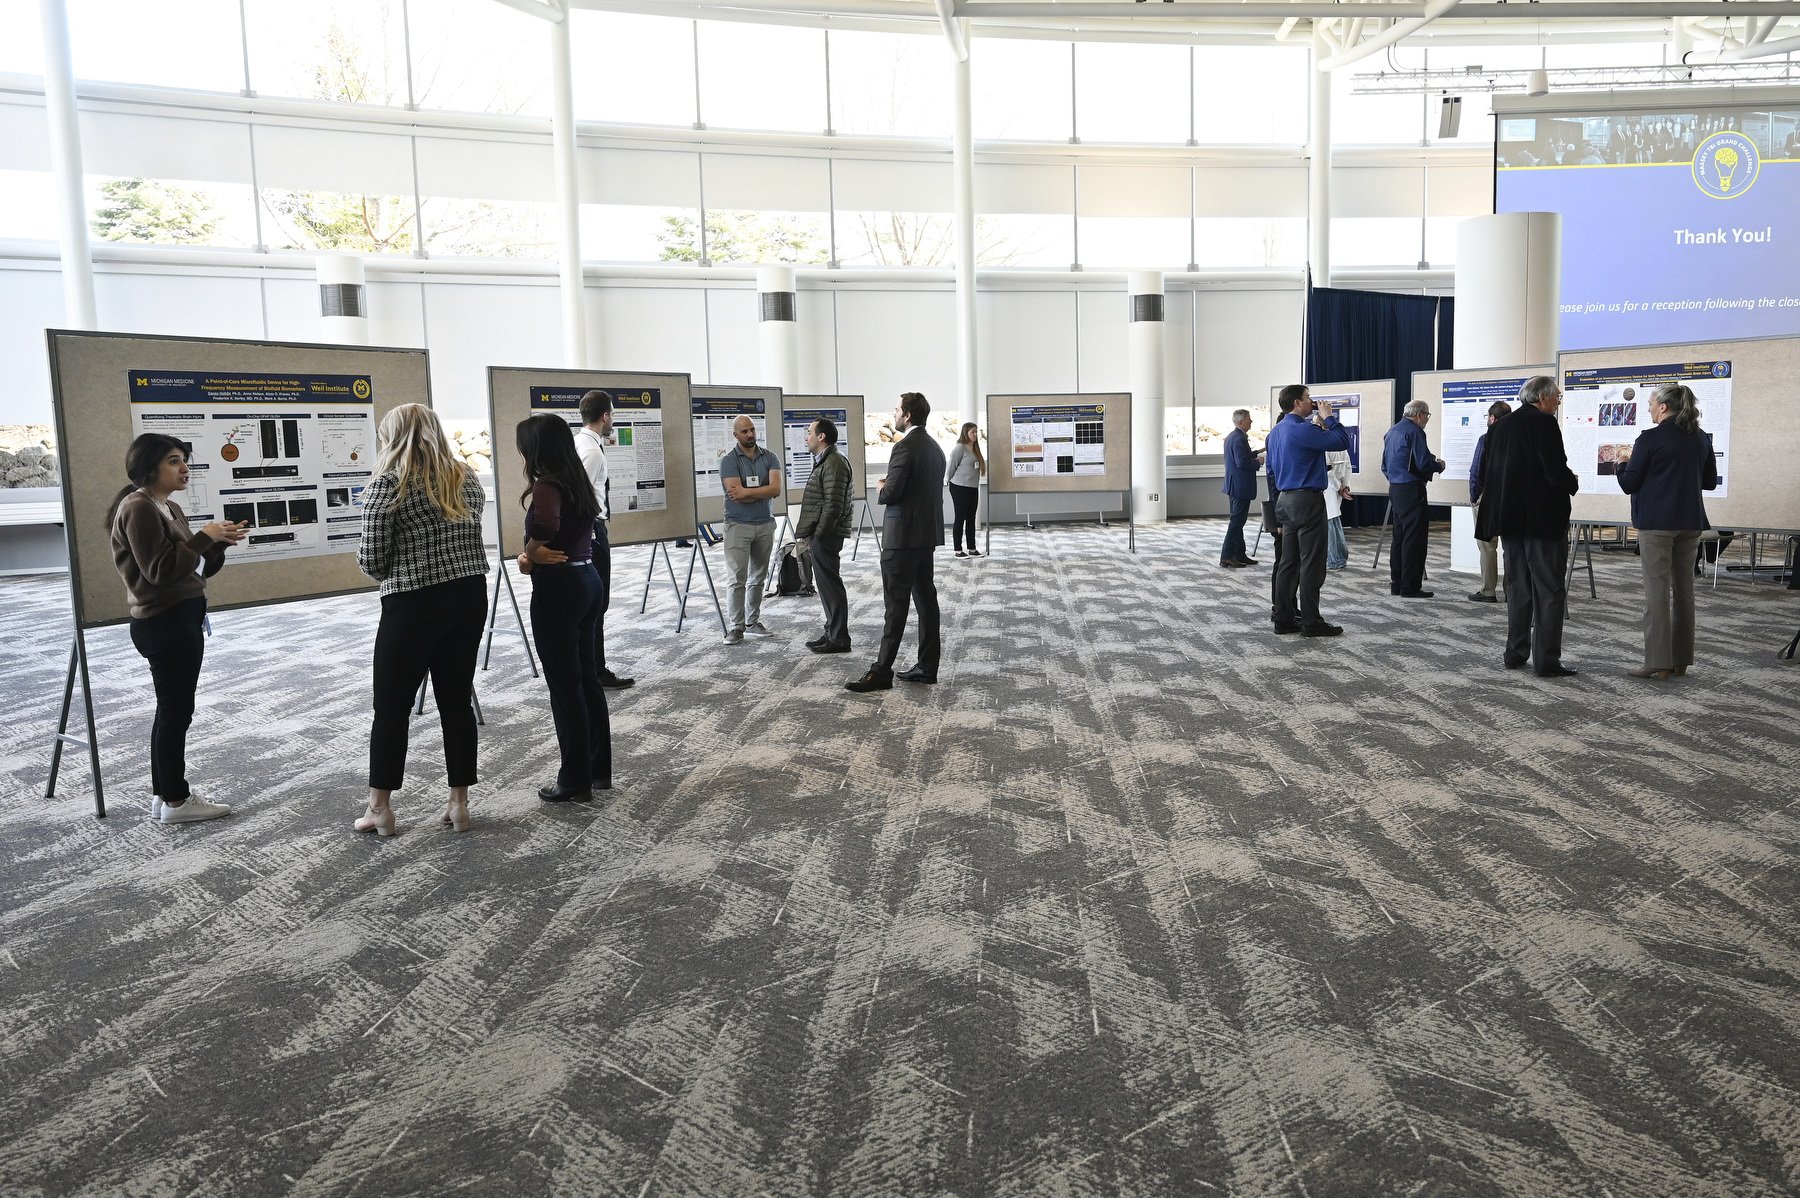  Previous Massey Grand Challenge-funded teams presented posters highlighting their latest work. 